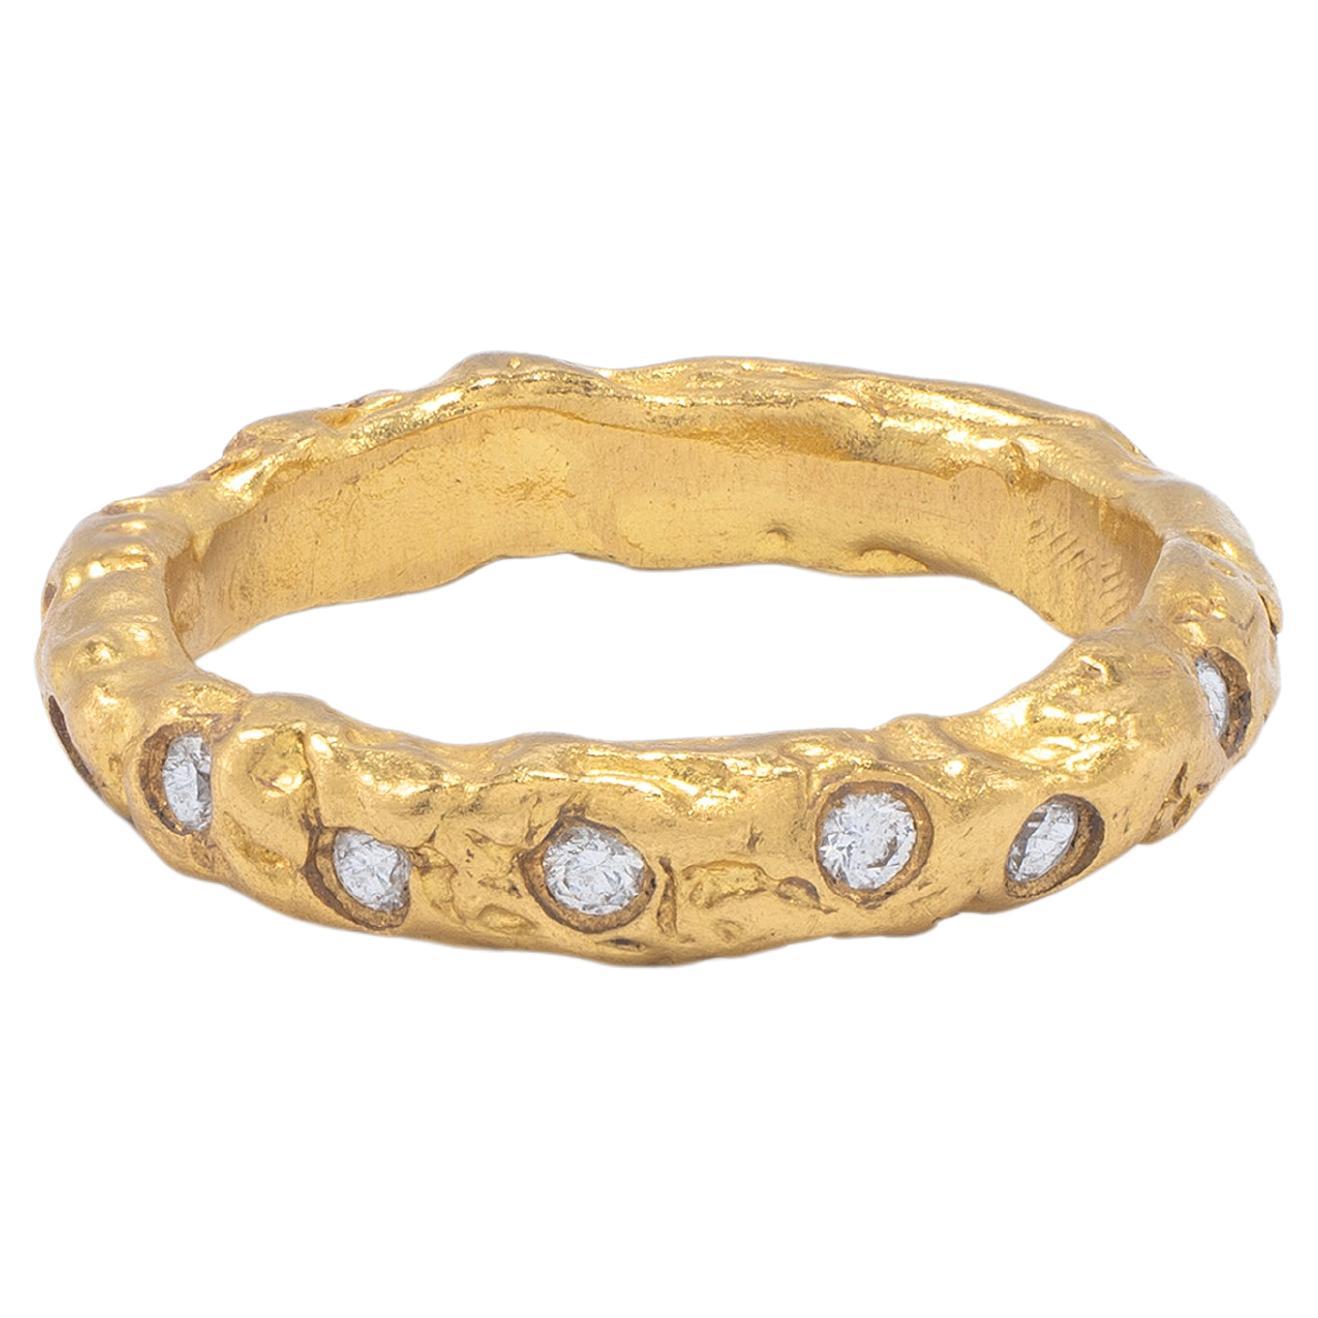 22k Gold Chunky Foil Stacking Rings with Diamonds, by Tagili